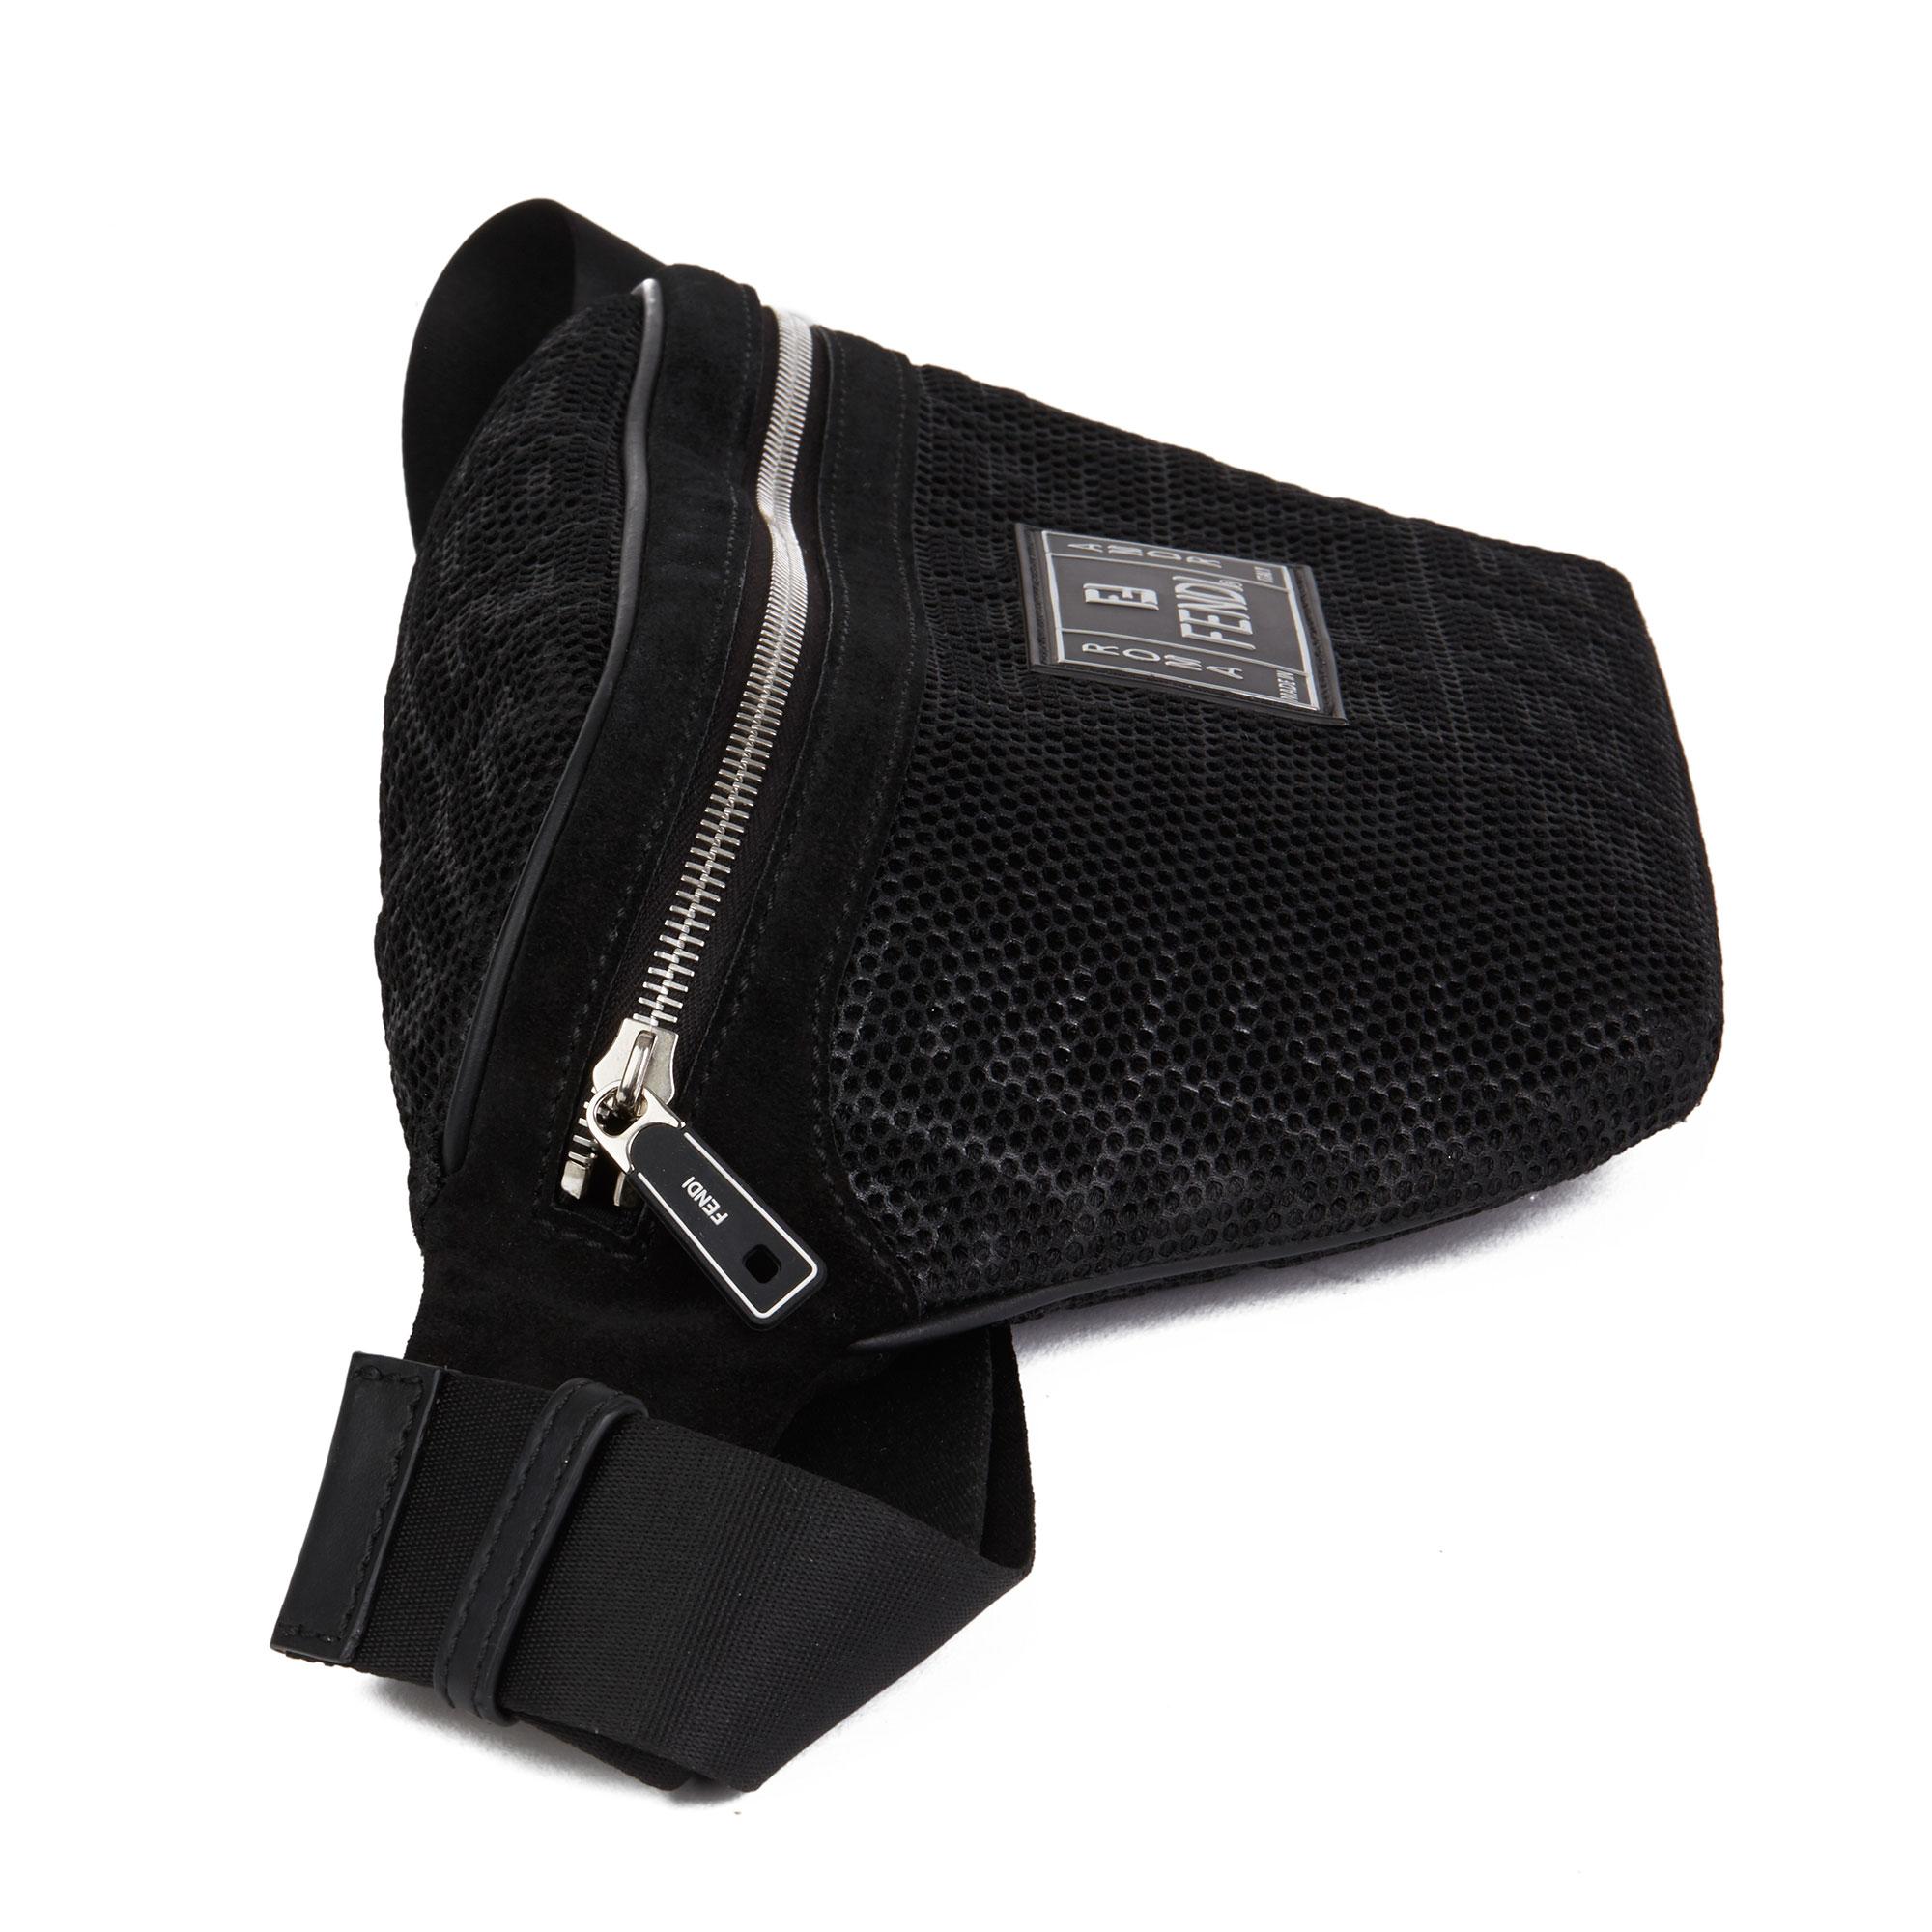 FENDI
Black Zucca Mesh & Suede Belt Bag

Serial Number: 05737275
Age (Circa): 2018
Accompanied By: Tag
Authenticity Details: Serial Stamp (Made in Italy)
Gender: Unisex
Type: Belt Bag

Colour: Black
Hardware: Silver
Material(s): Mesh,